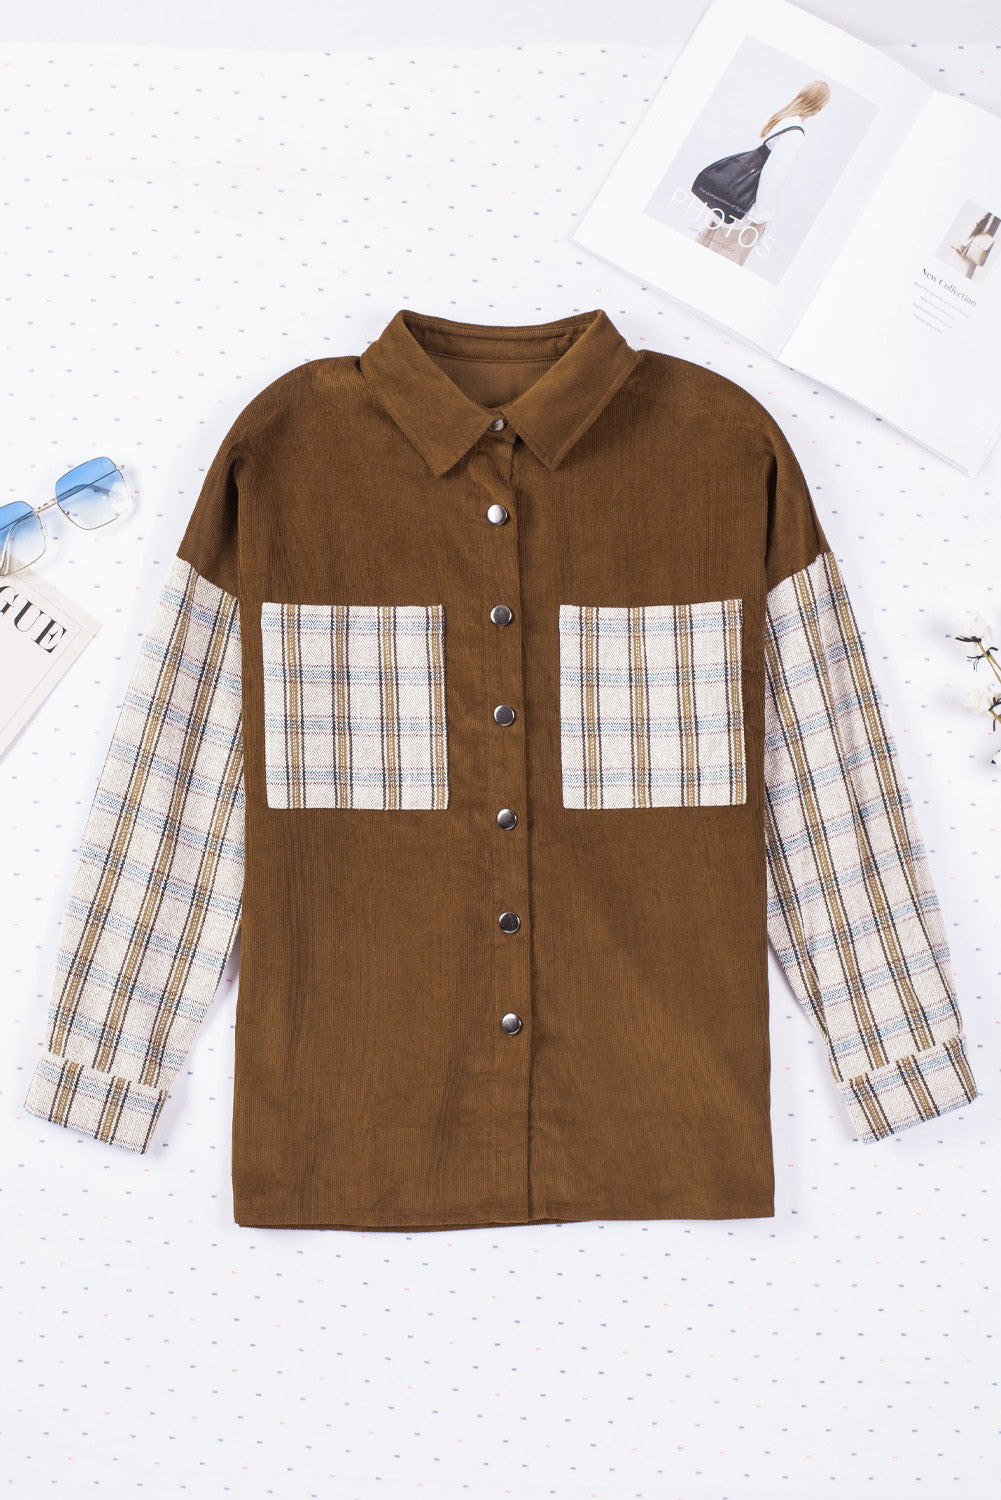 Brown Plaid Patchwork Corduroy Shirt Jacket with Pocket